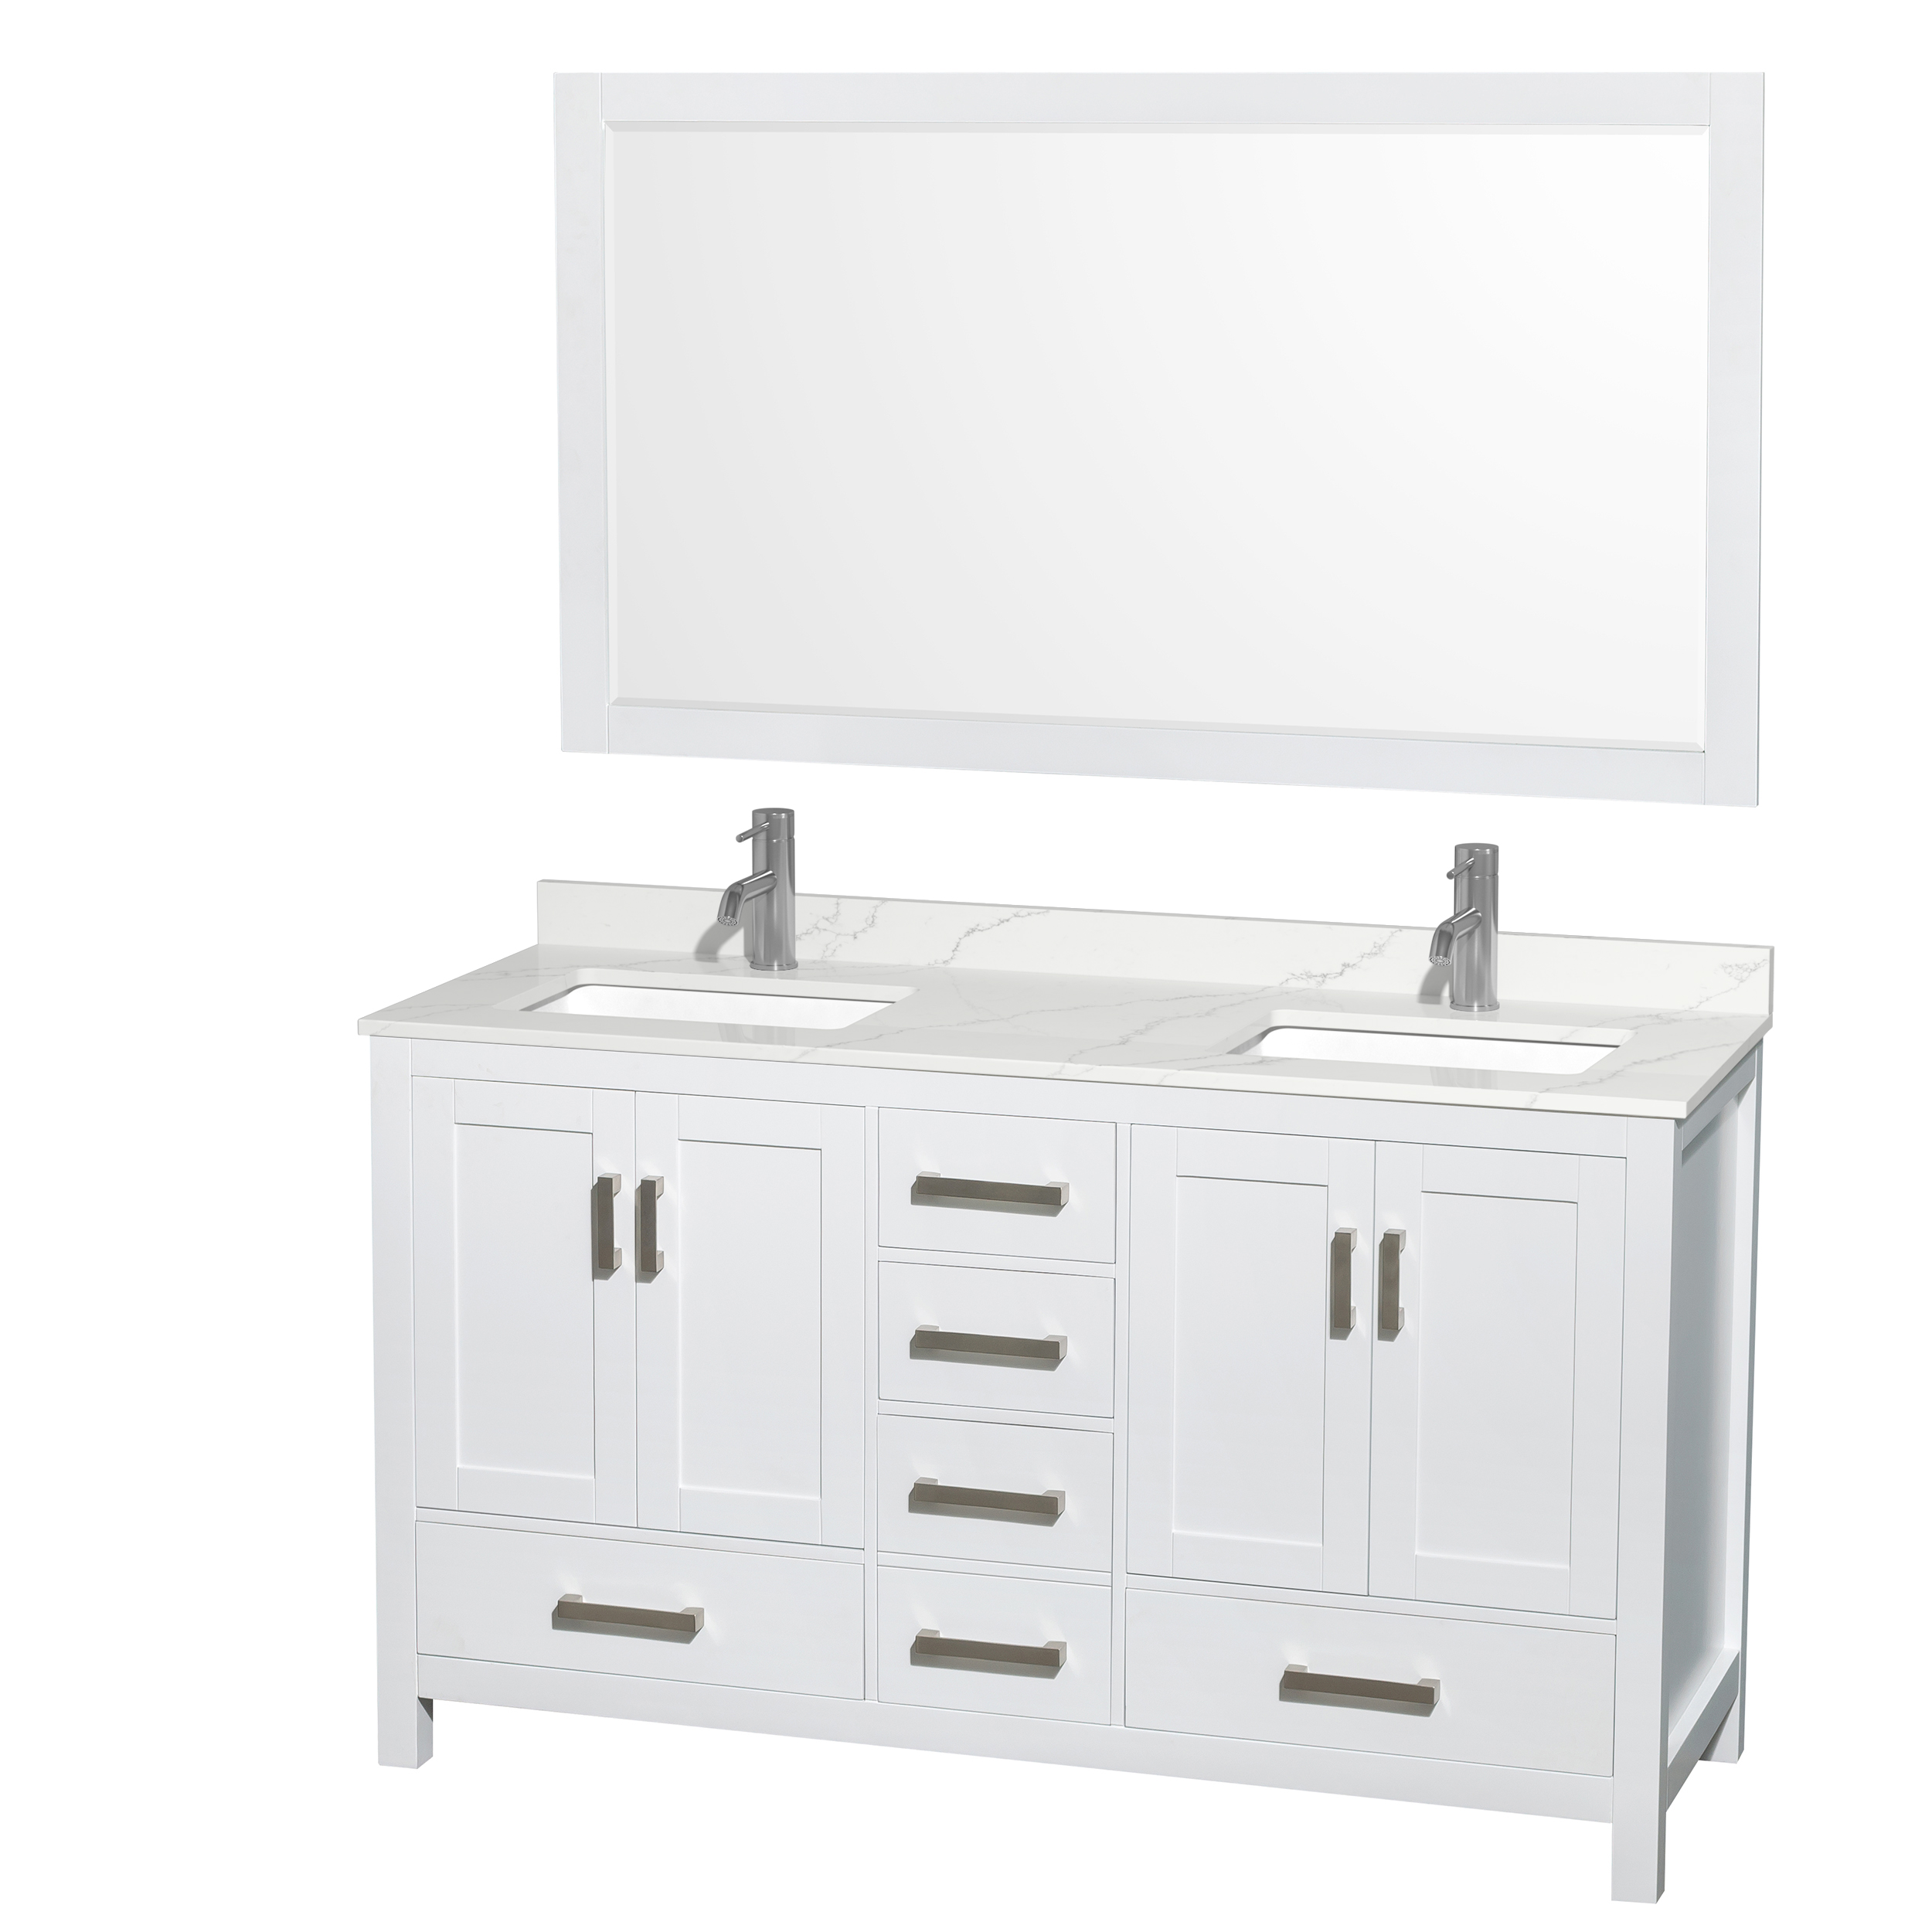 Sheffield 60" Double Bathroom Vanity by Wyndham Collection - White WC-1414-60-DBL-VAN-WHT